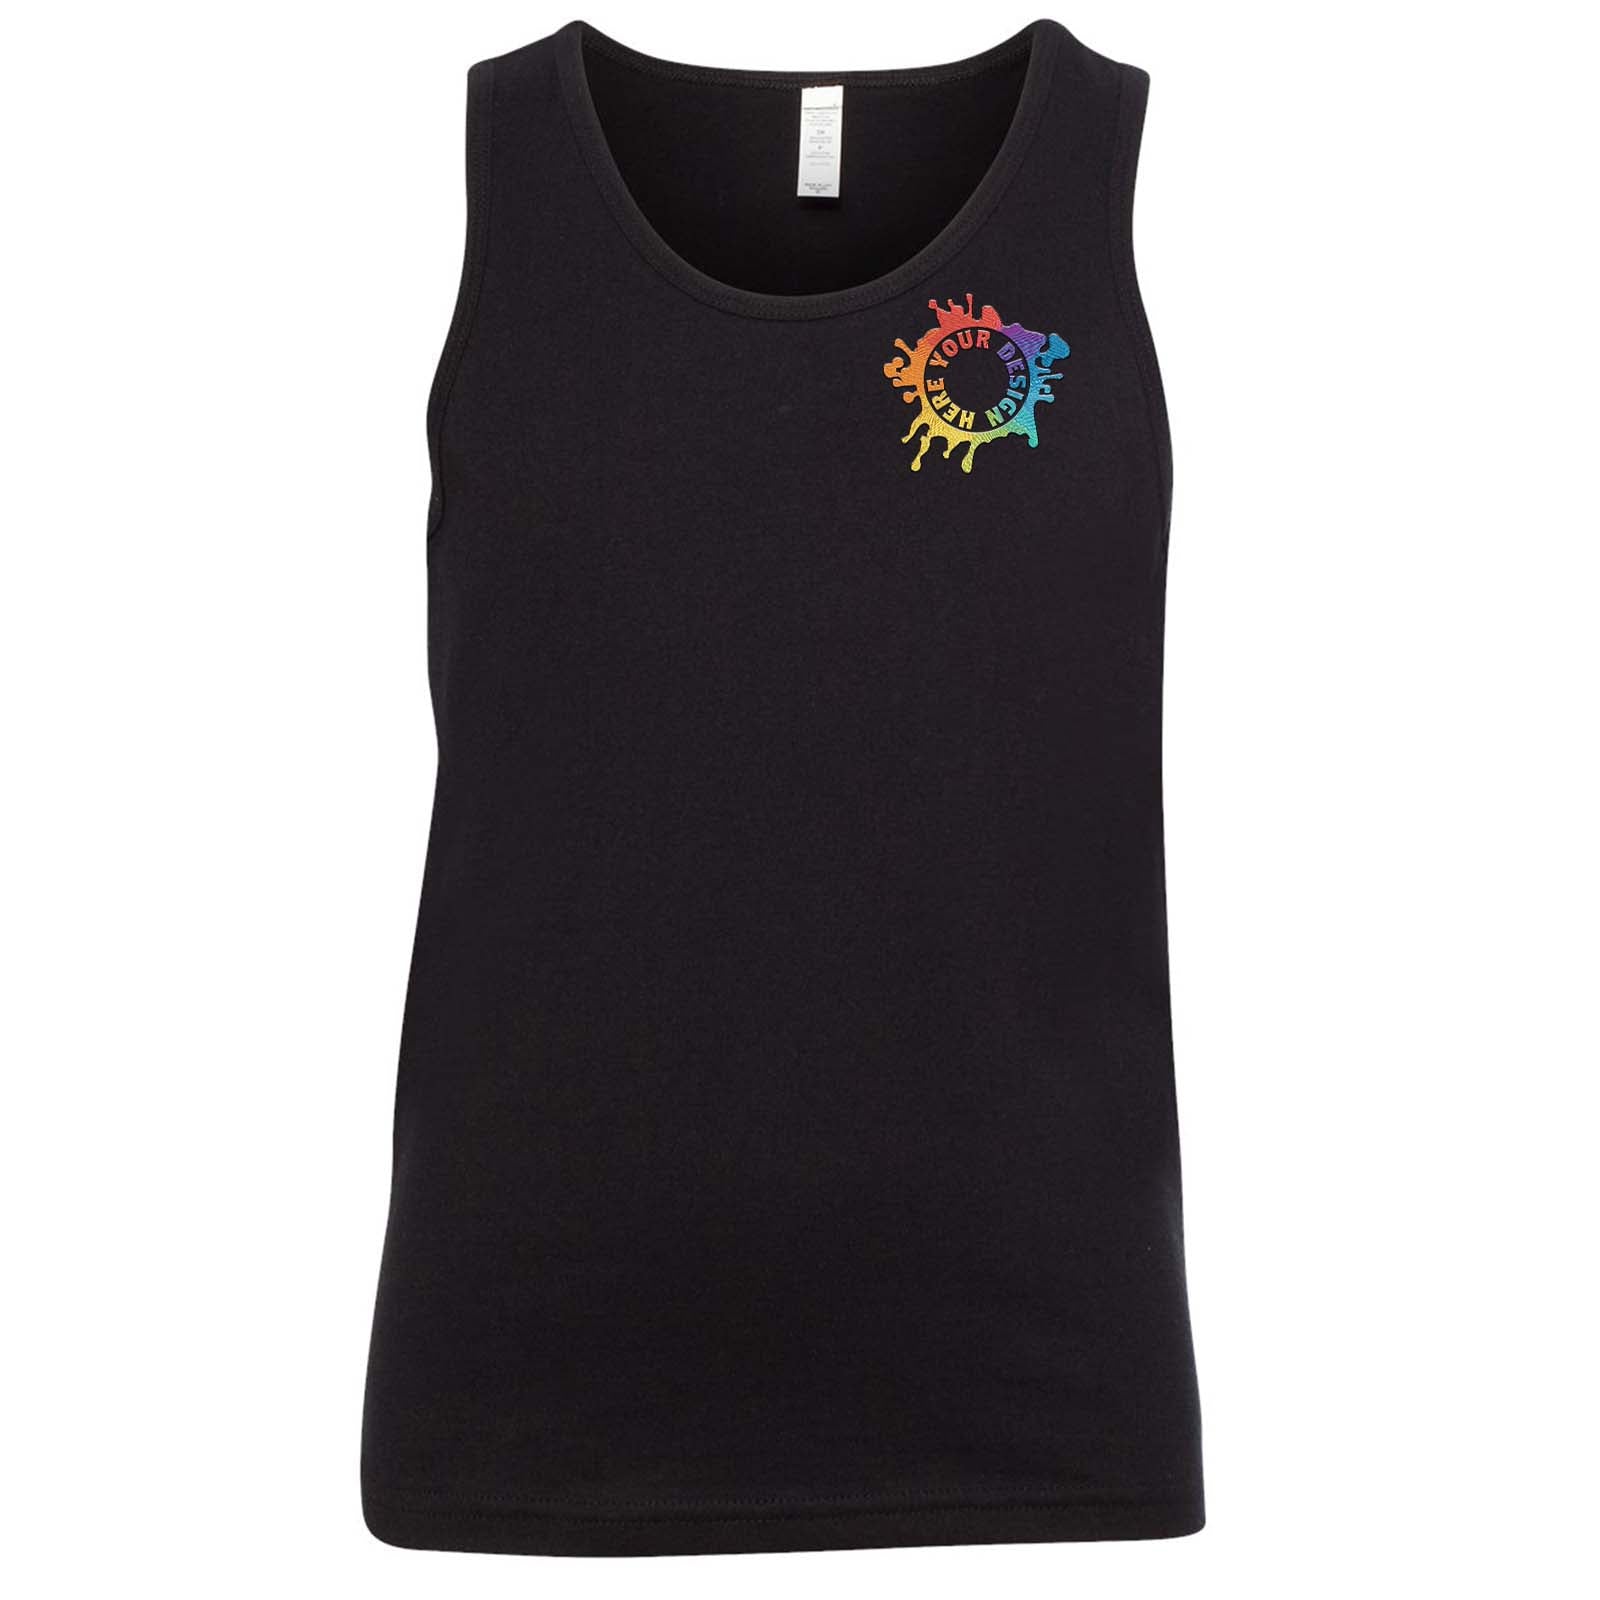 Bella + Canvas Youth Unisex 100% Cotton Jersey Tank Top Embroidery - Mato & Hash